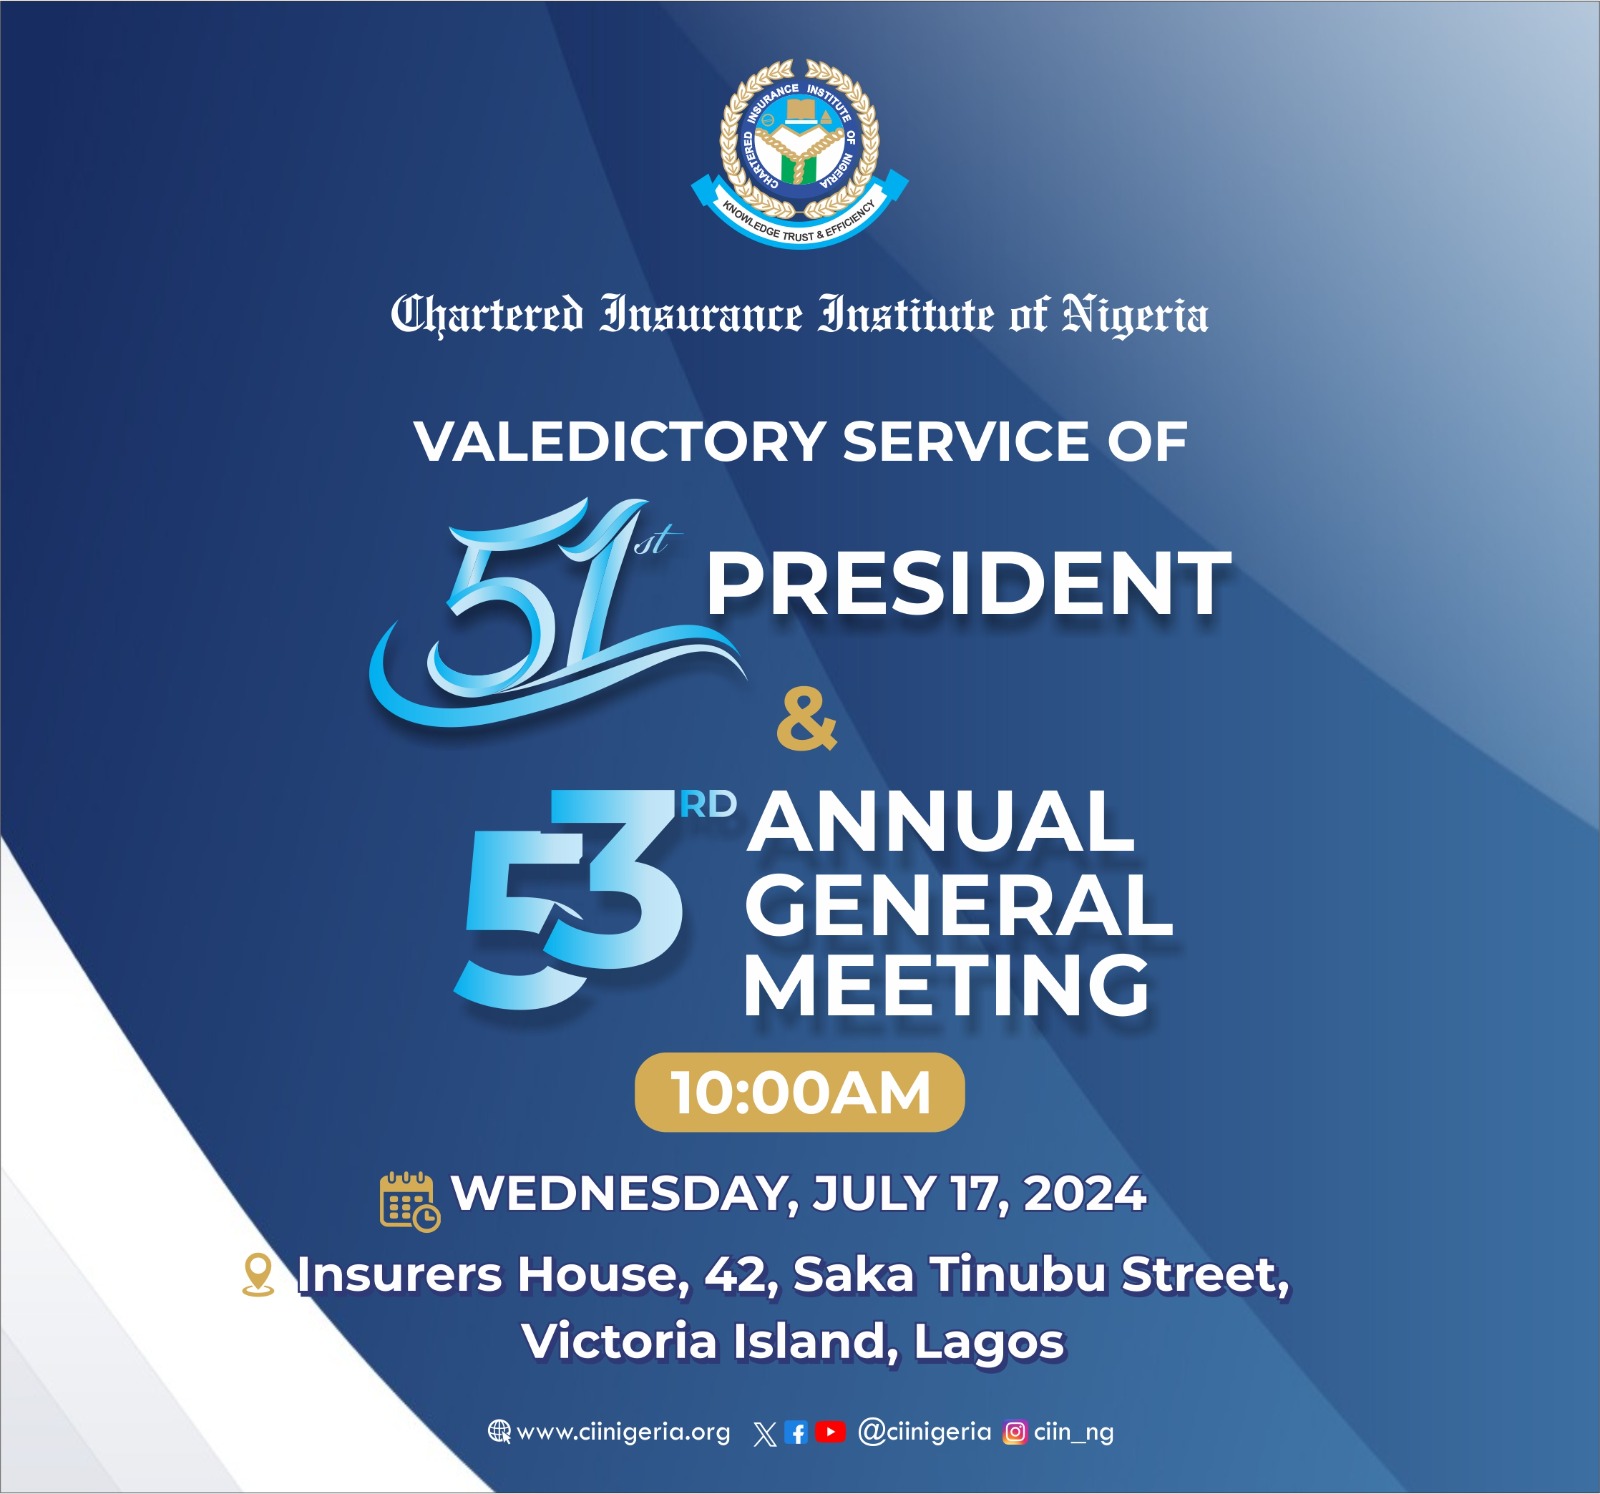 Image for VALEDICTORY SERVICE OF THE 51ST PRESIDENT & 53RD ANNUAL GENERAL MEETING